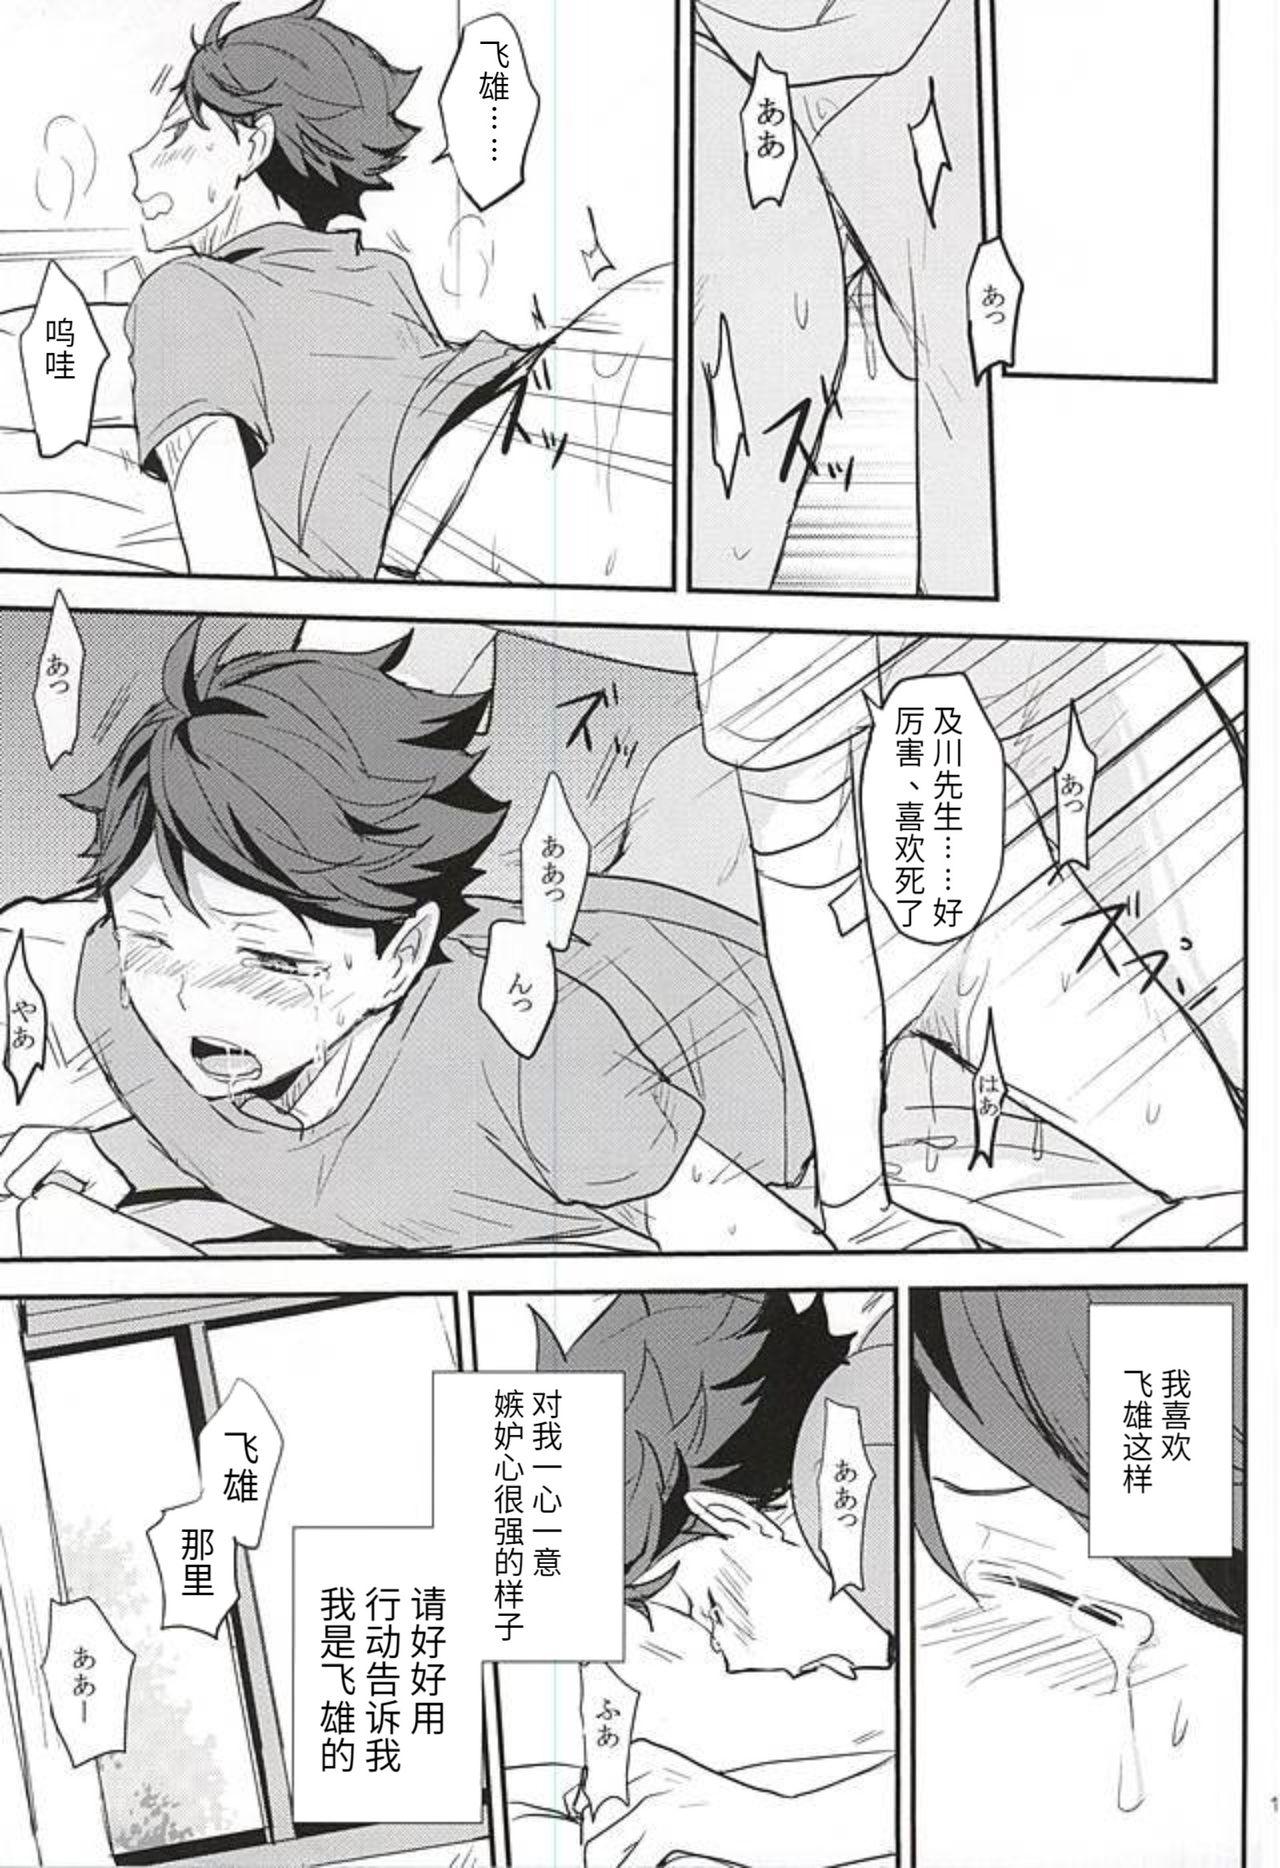 Old Young 此名为爱 THIS THING CALLED LOVE - Haikyuu Animated - Page 17